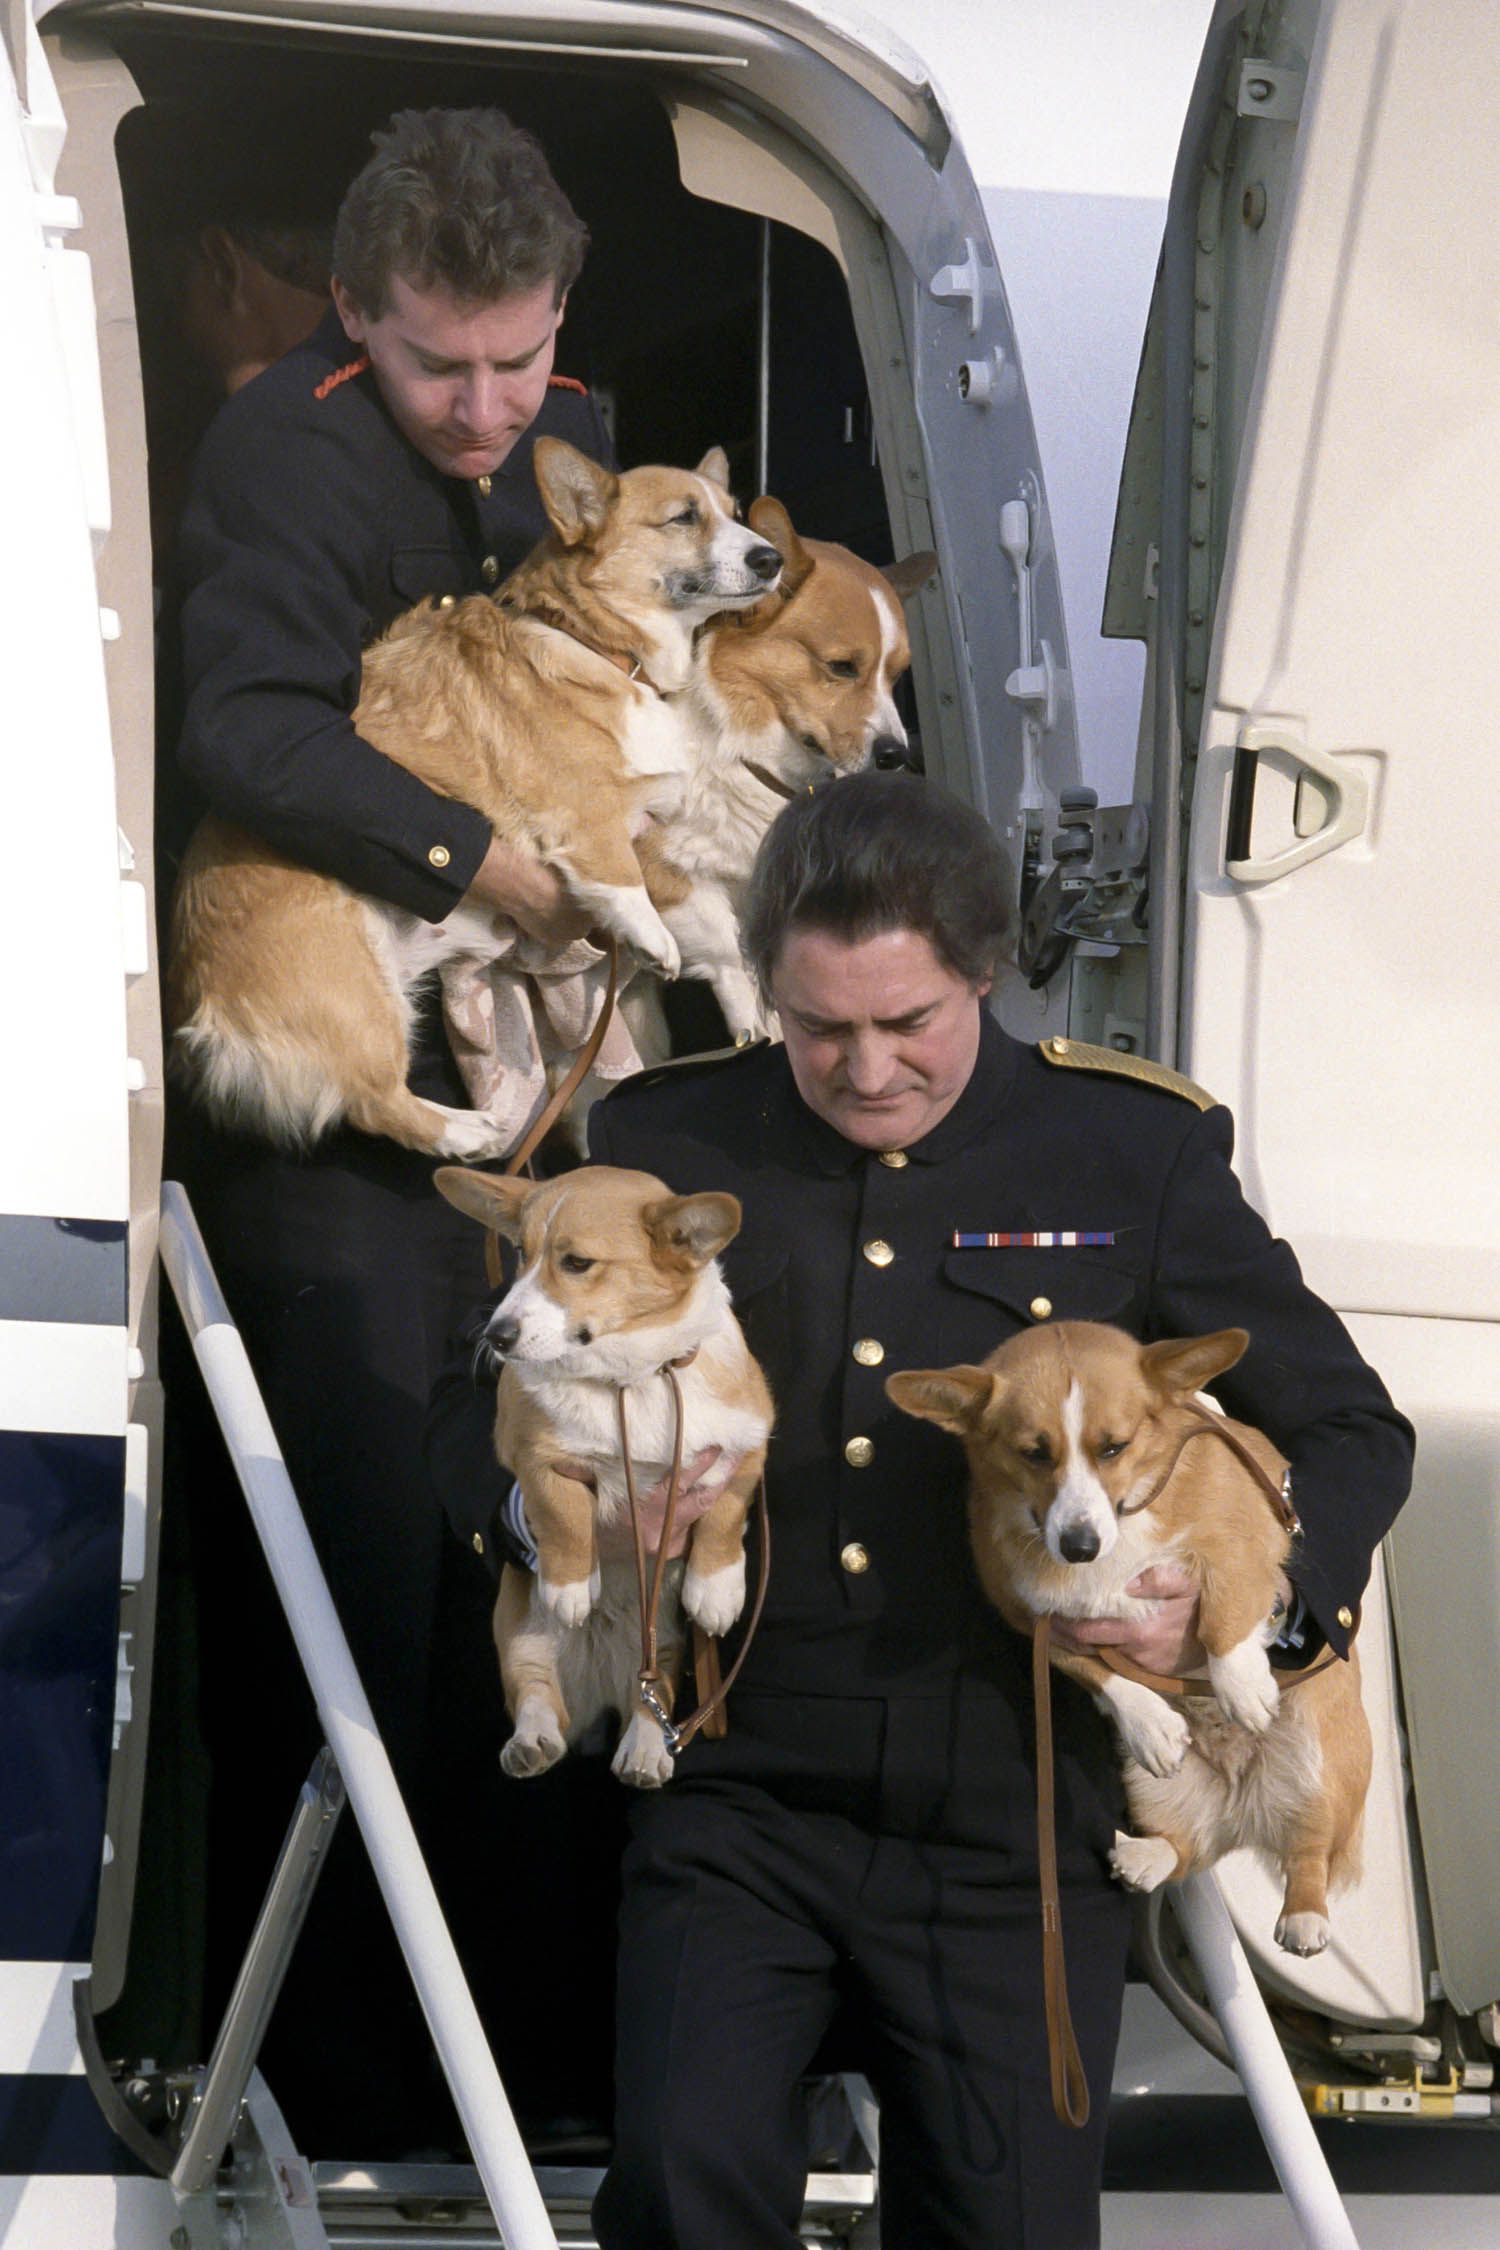 Queen Elizabeth II's corgis being held by her people to go outside the plane